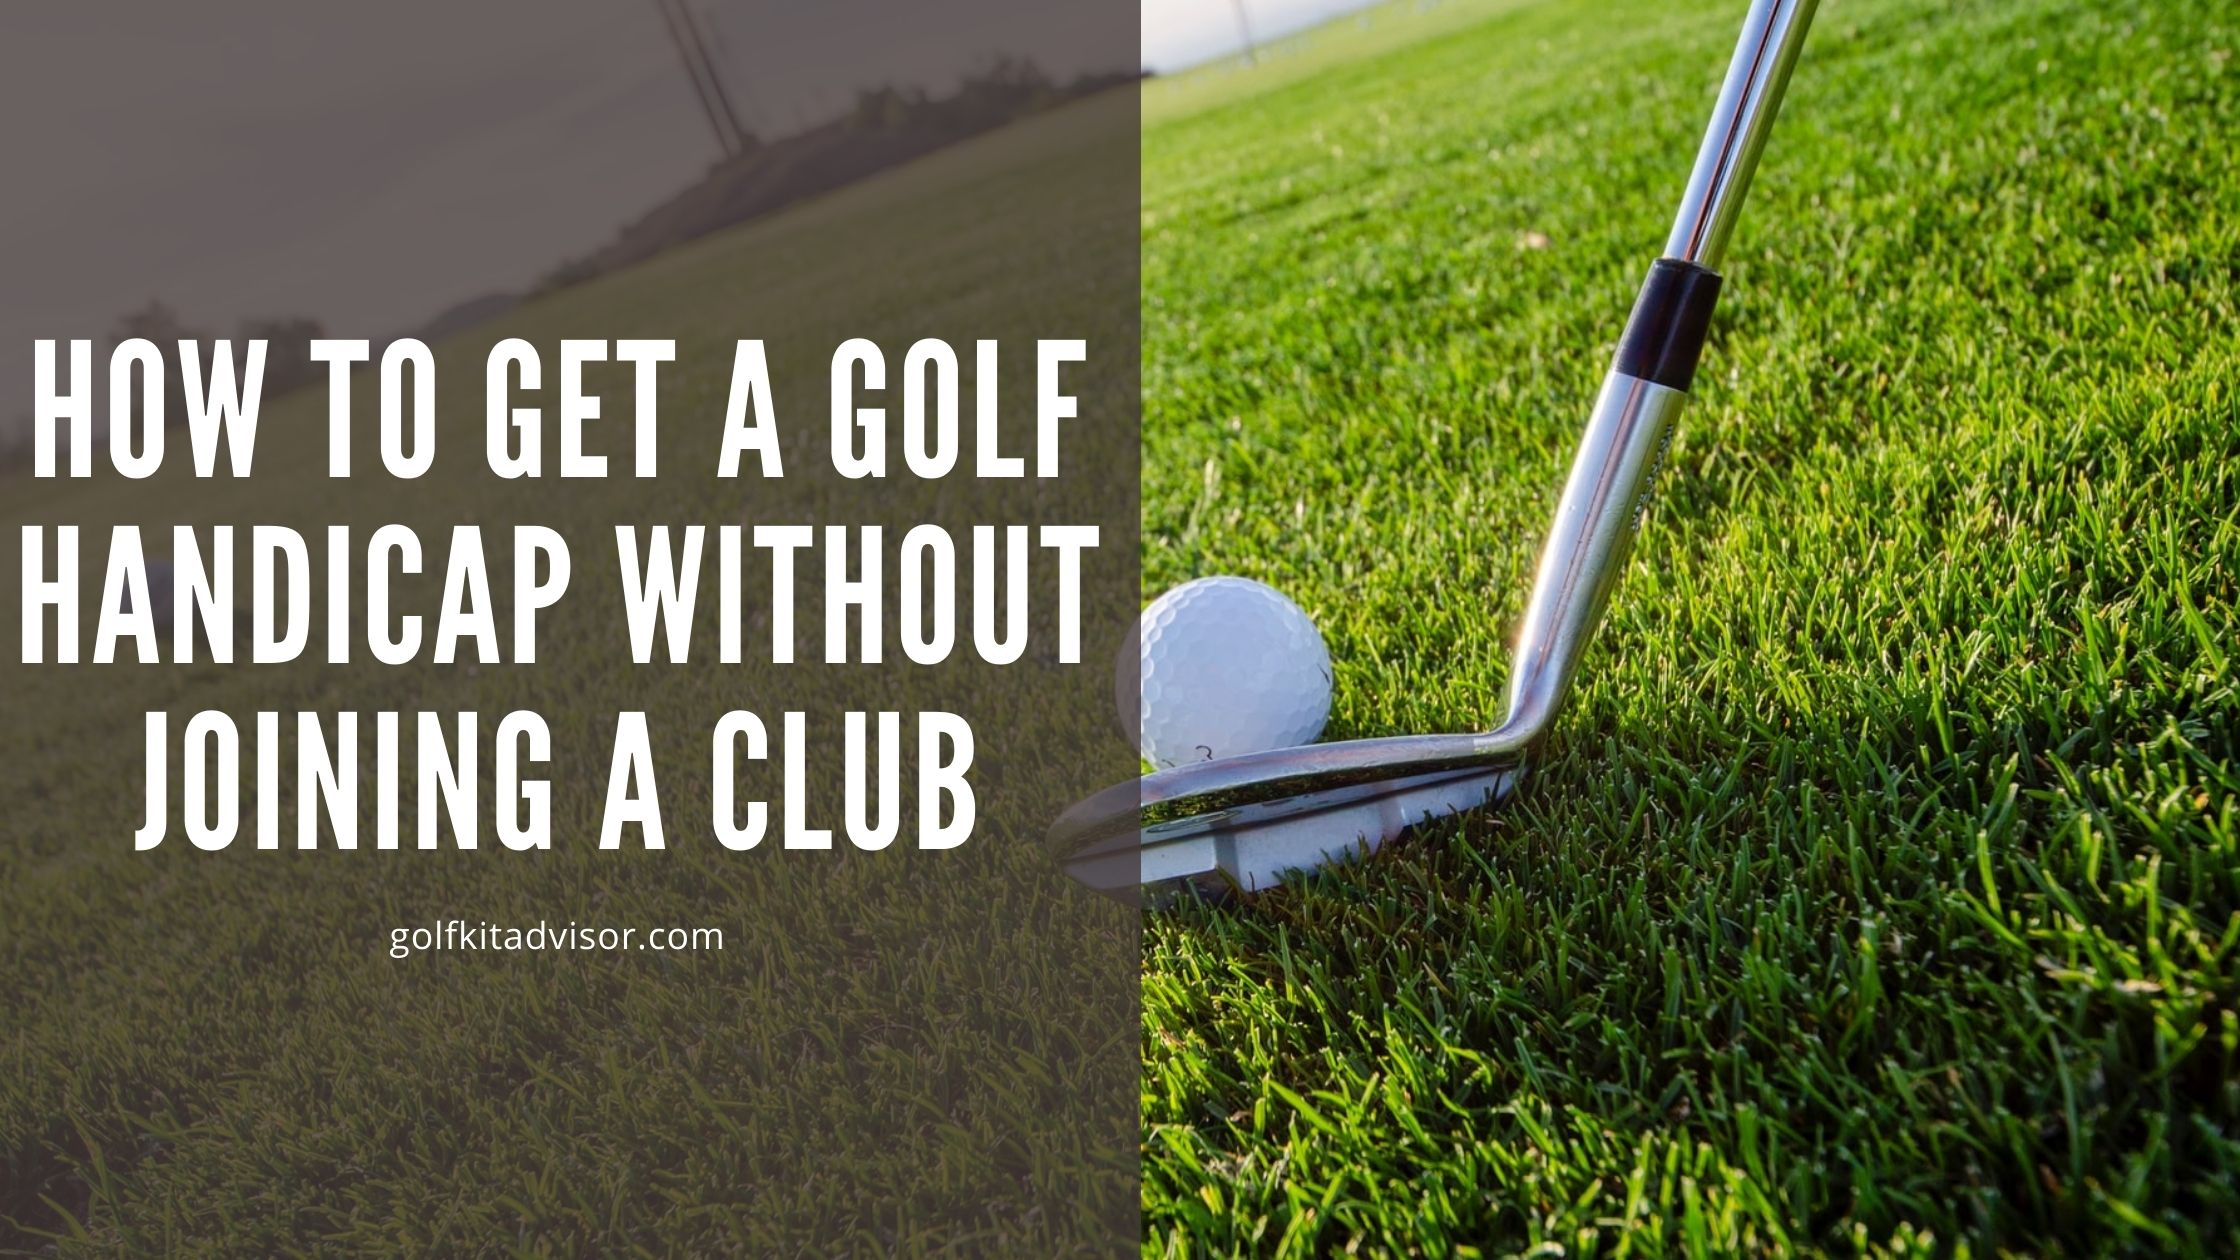 How to Get a Golf Handicap Without Joining a Club